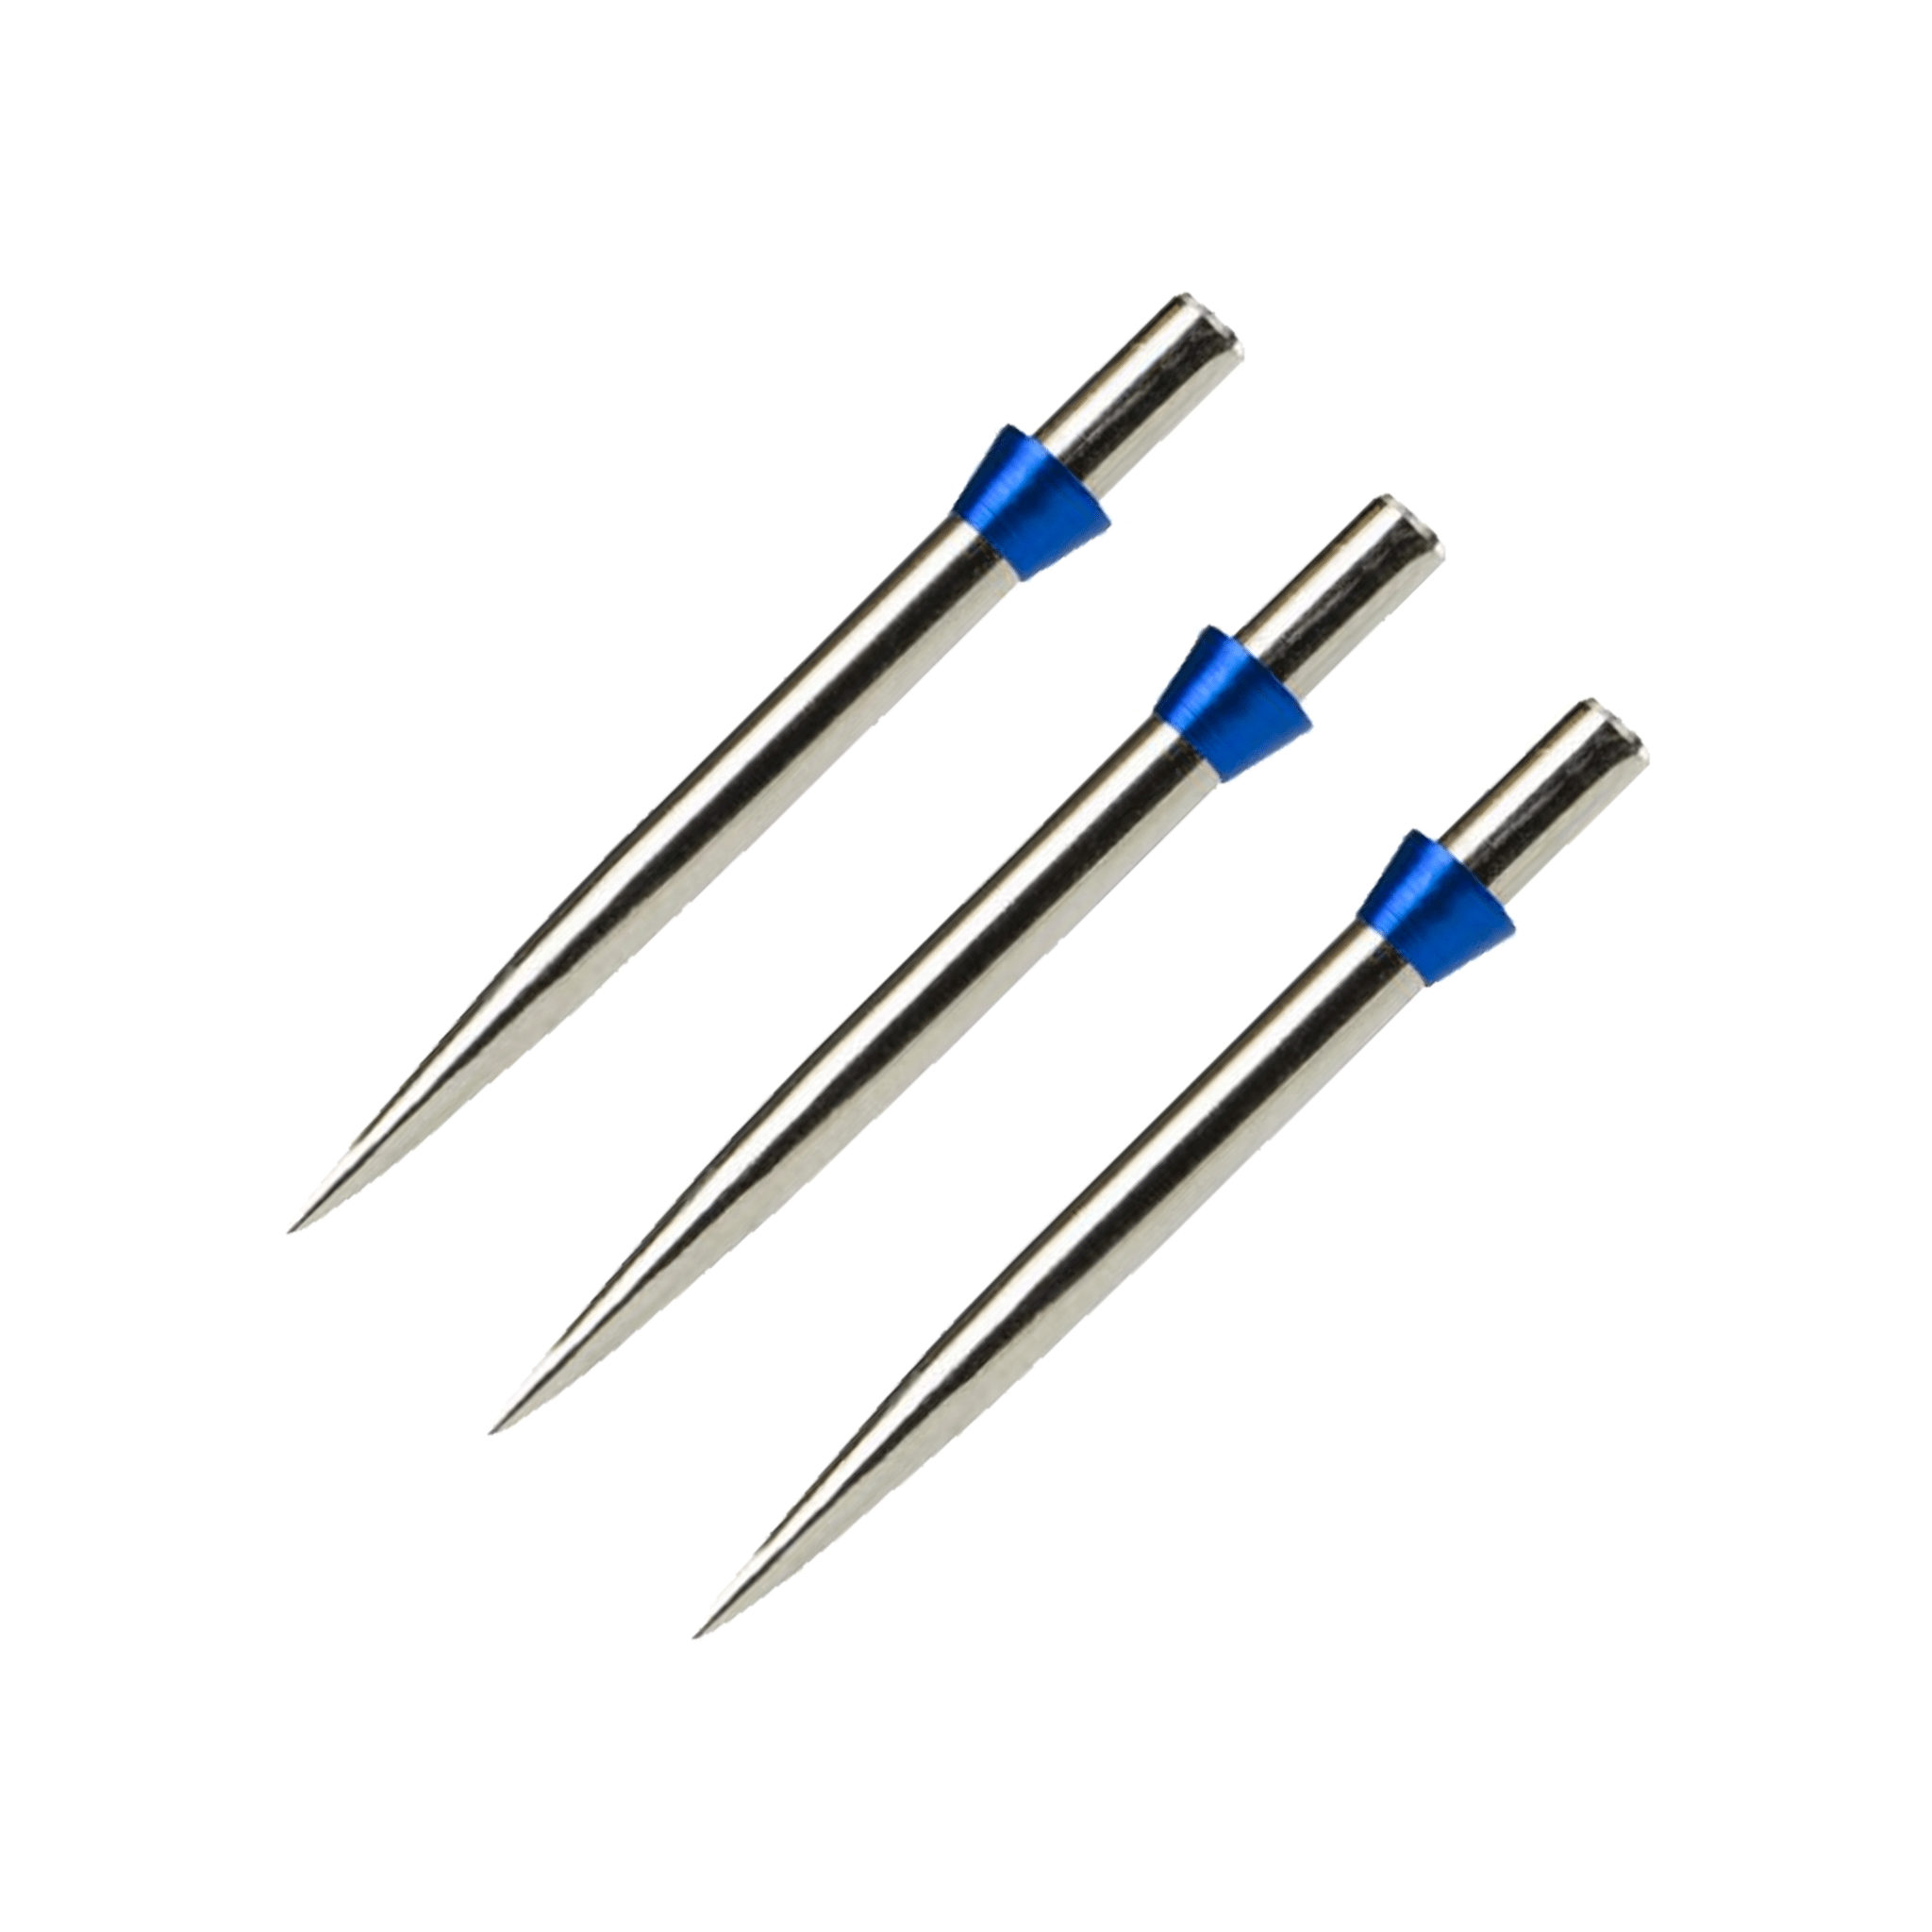 Red Dragon Trident - Dart Points 32mm / Silver & Blue Accessories